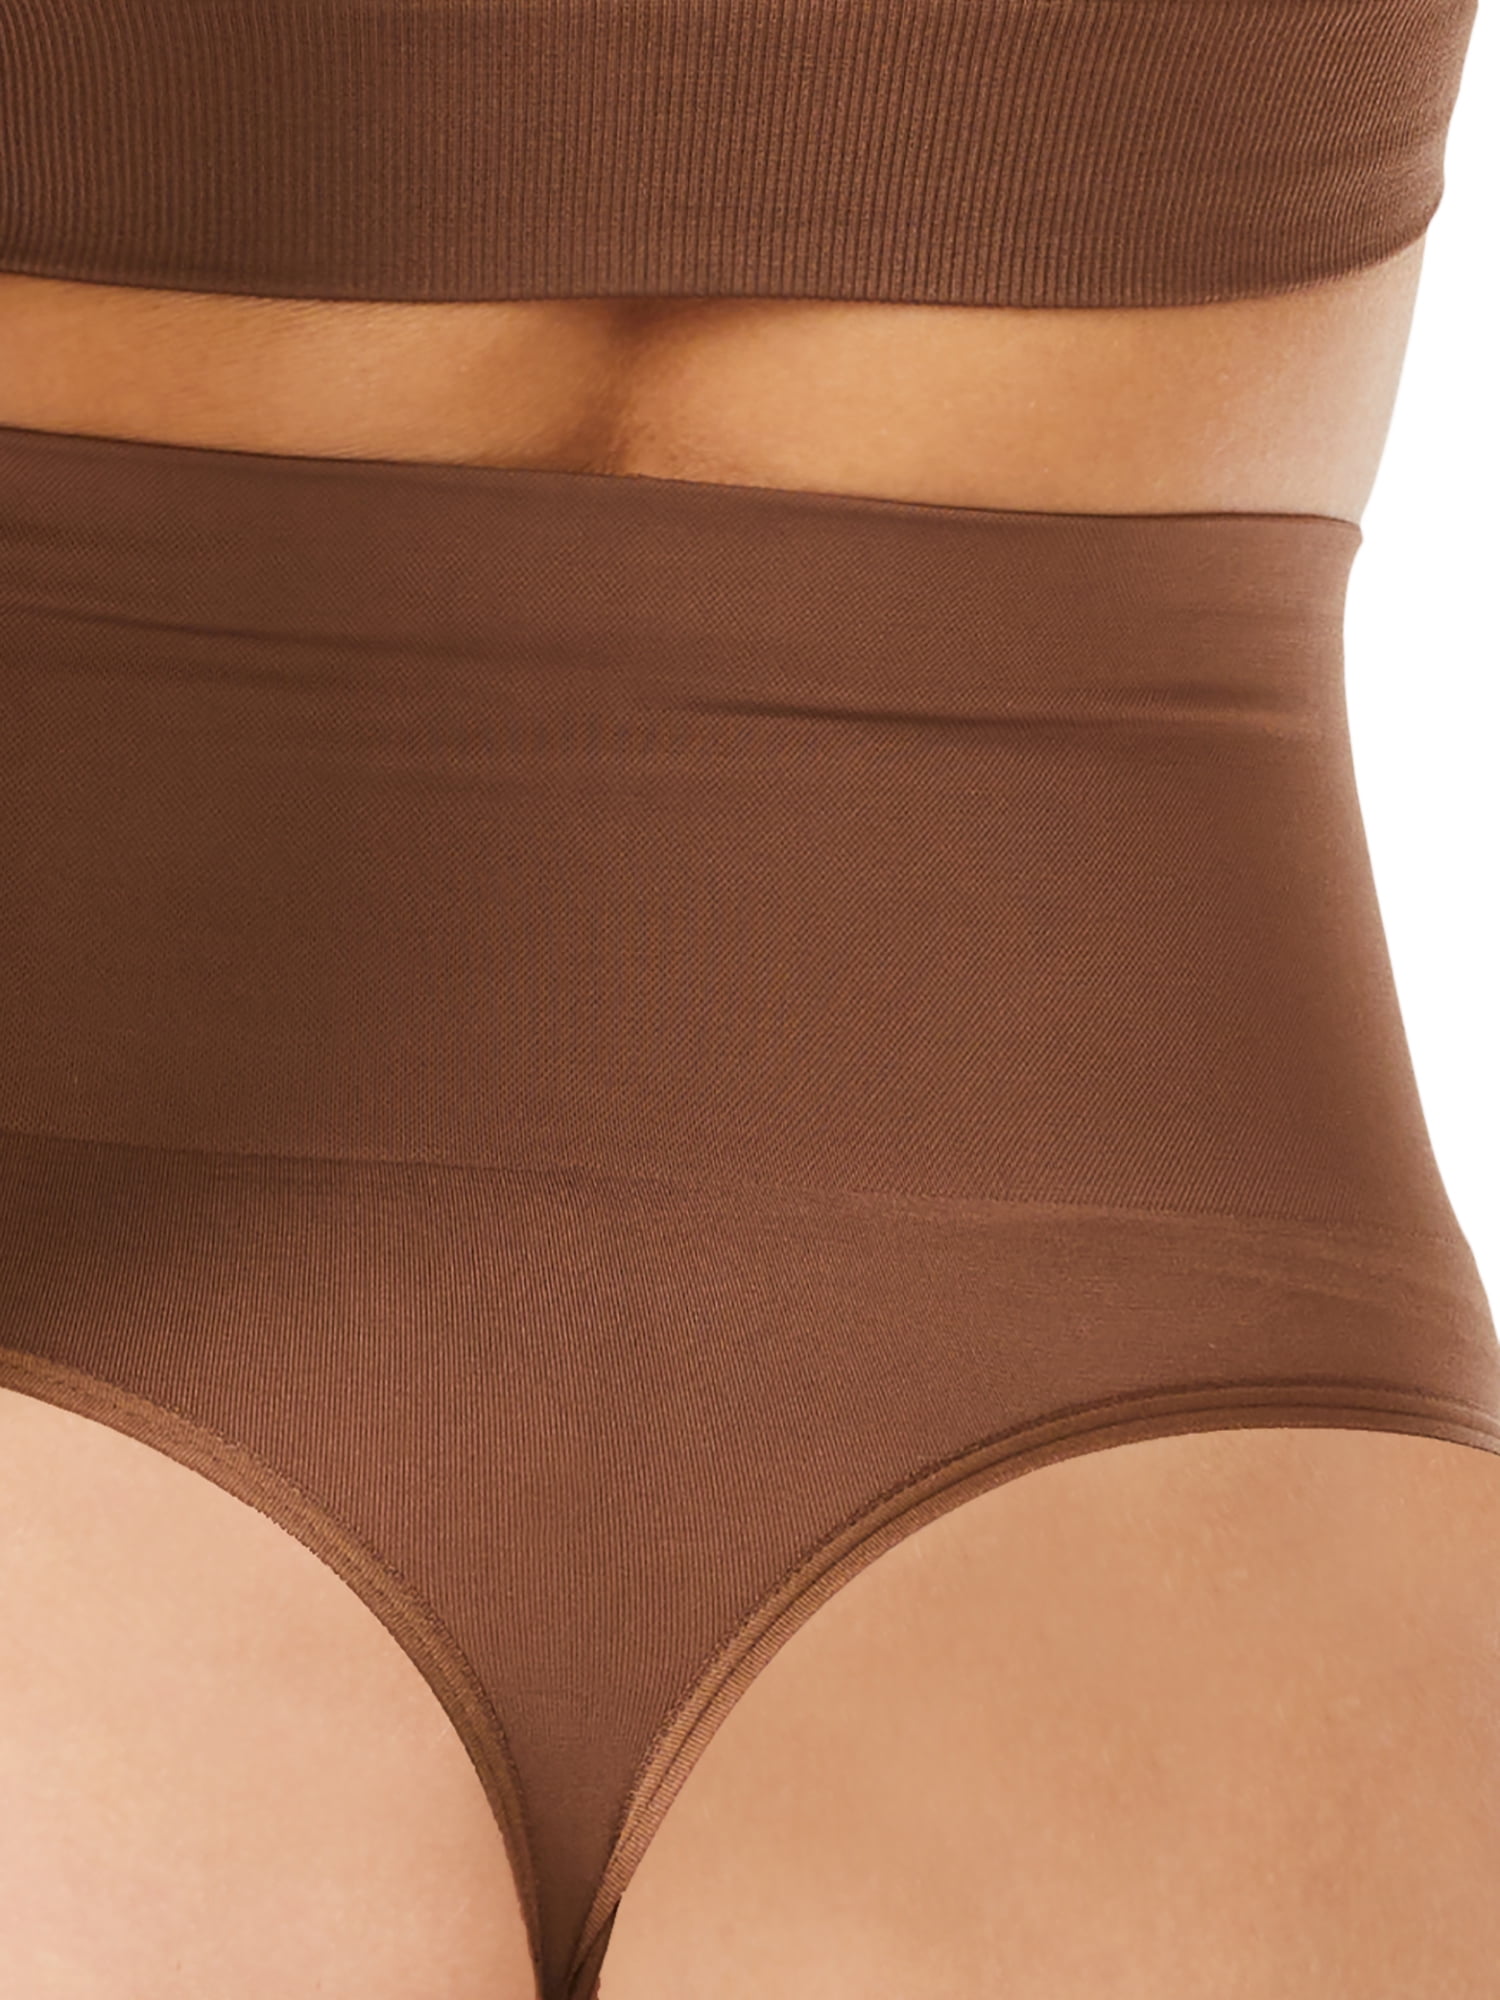 Pants For Women Brown Thong Seamless Thong Shapewear With Tummy Control And  High Waisted Power 2 Pack From Freshadang, $16.45